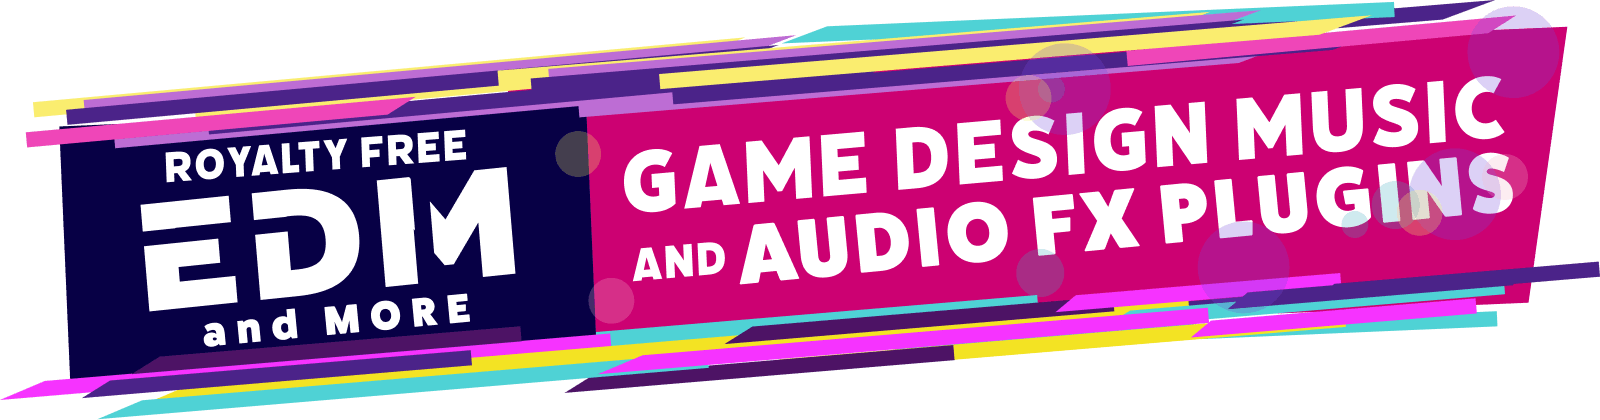 Royalty Free EDM and More - Game Design Music and Audio FX Plugins